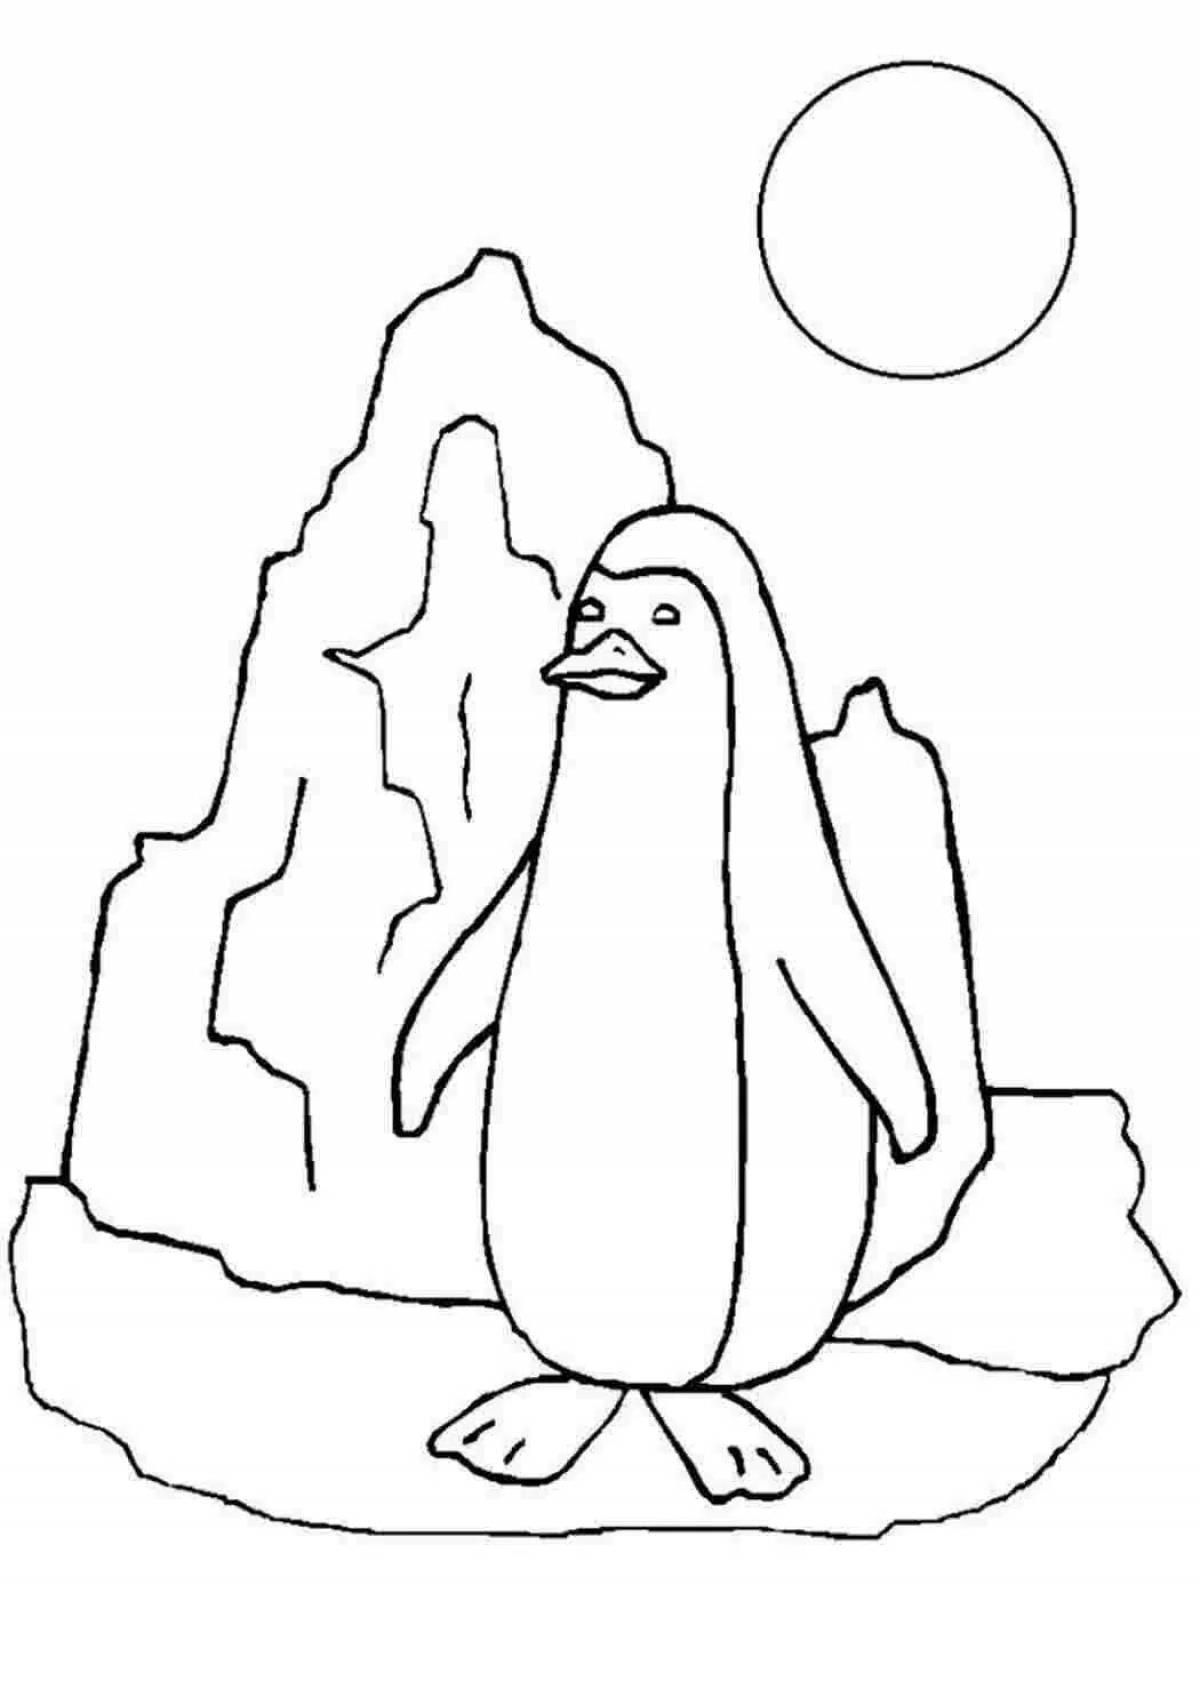 Coloring book jovial antarctica for children 6-7 years old